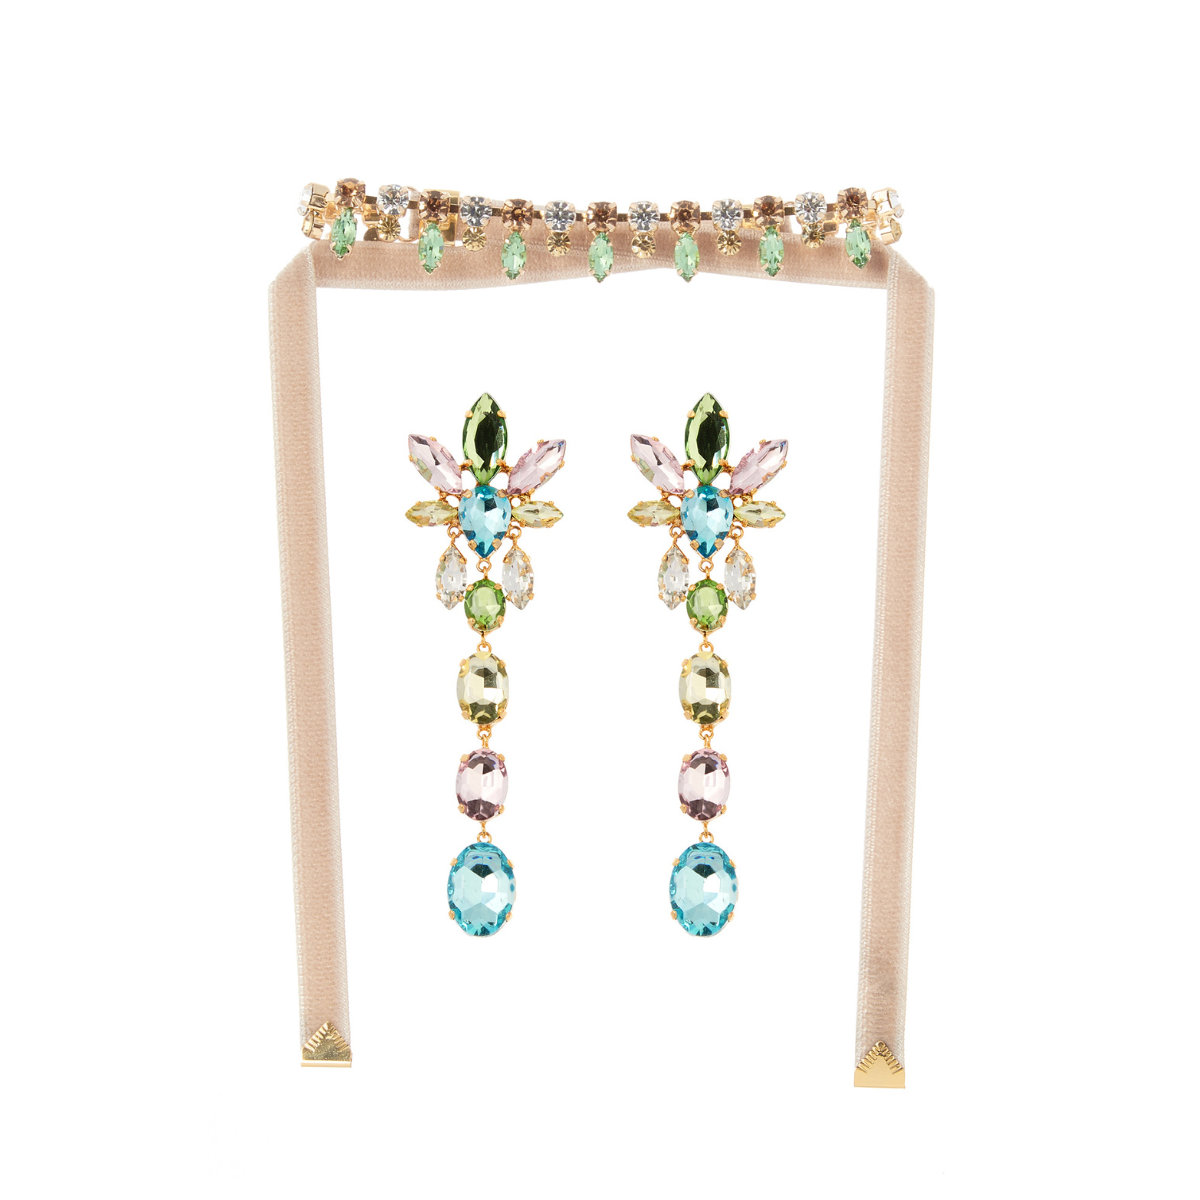 NOTTING HILL Crystal Jewelry Set